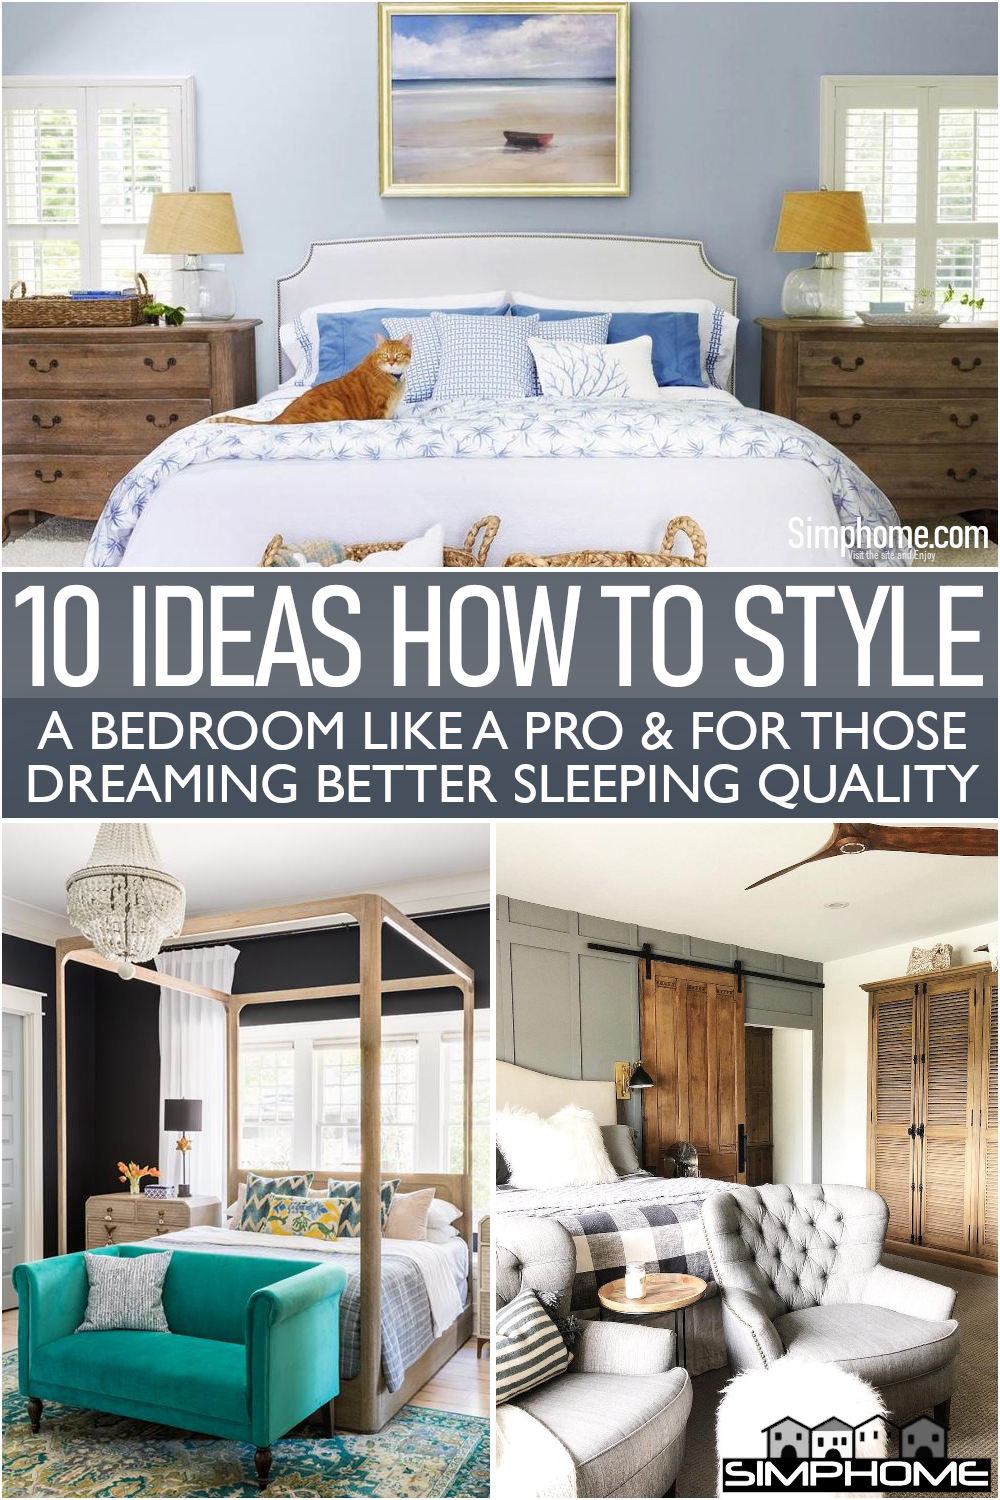 This is awesome and inspiring 10 Ideas to Style A Bedroom Like a Champ